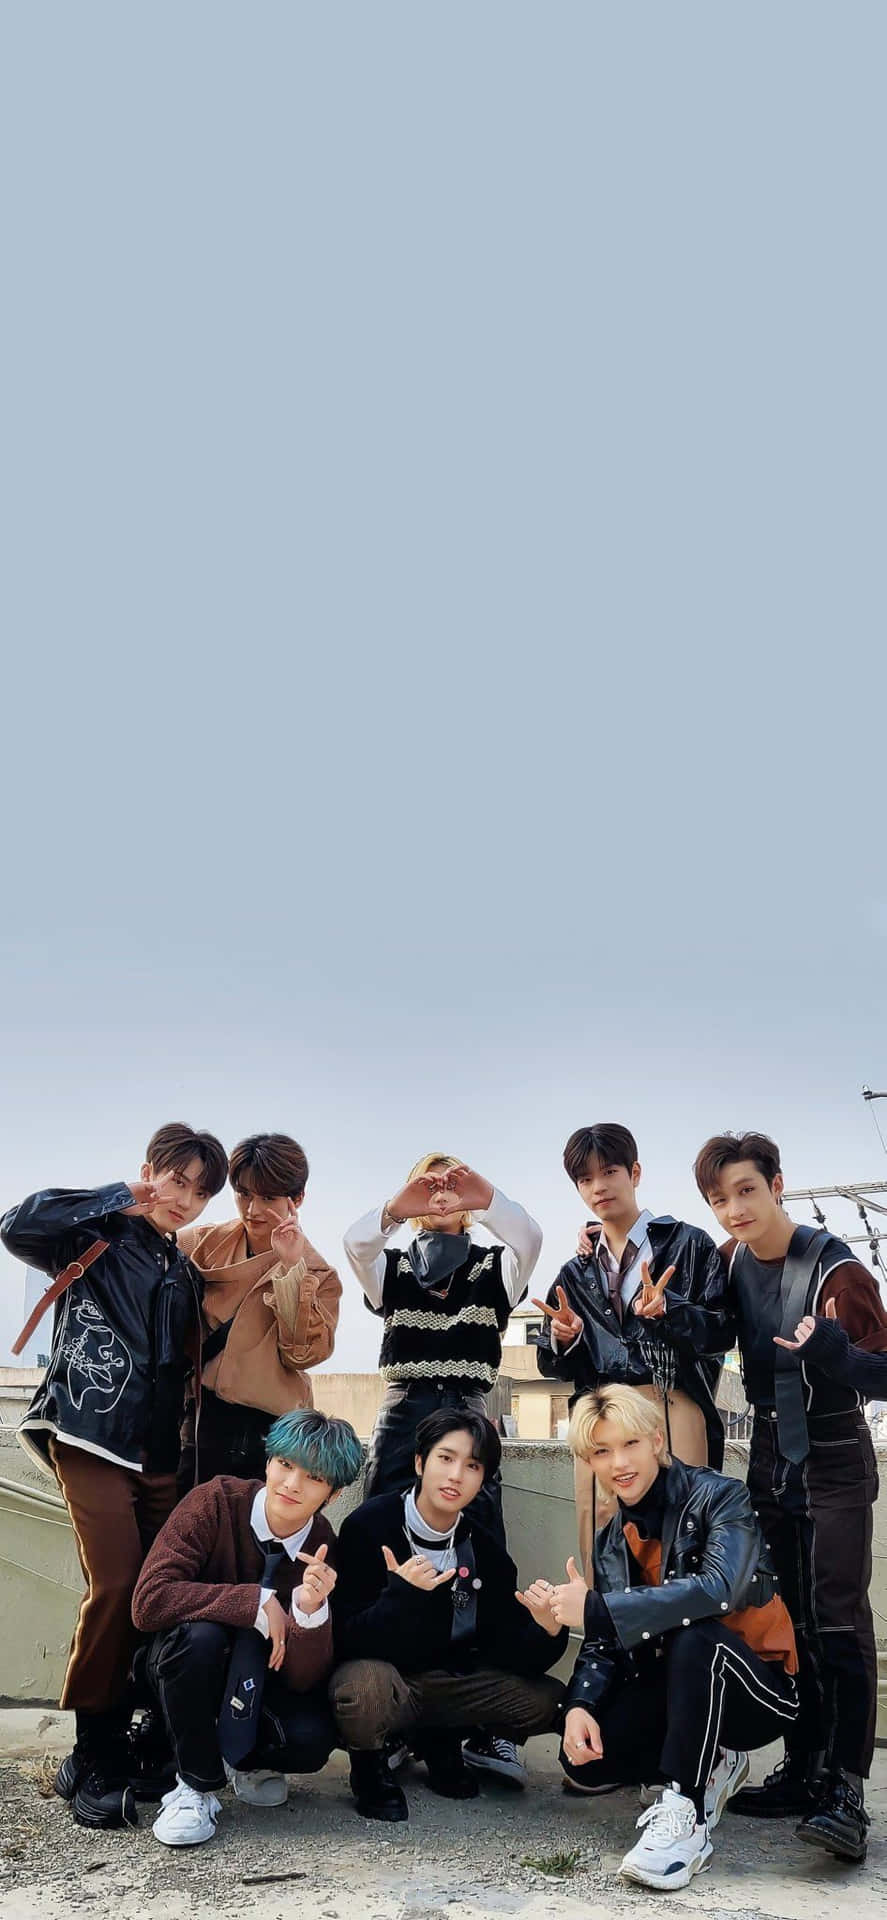 Members of South Korean pop group Stray Kids strike a pose in tech-inspired outfits for their 2020 promotional photo shoot. Wallpaper